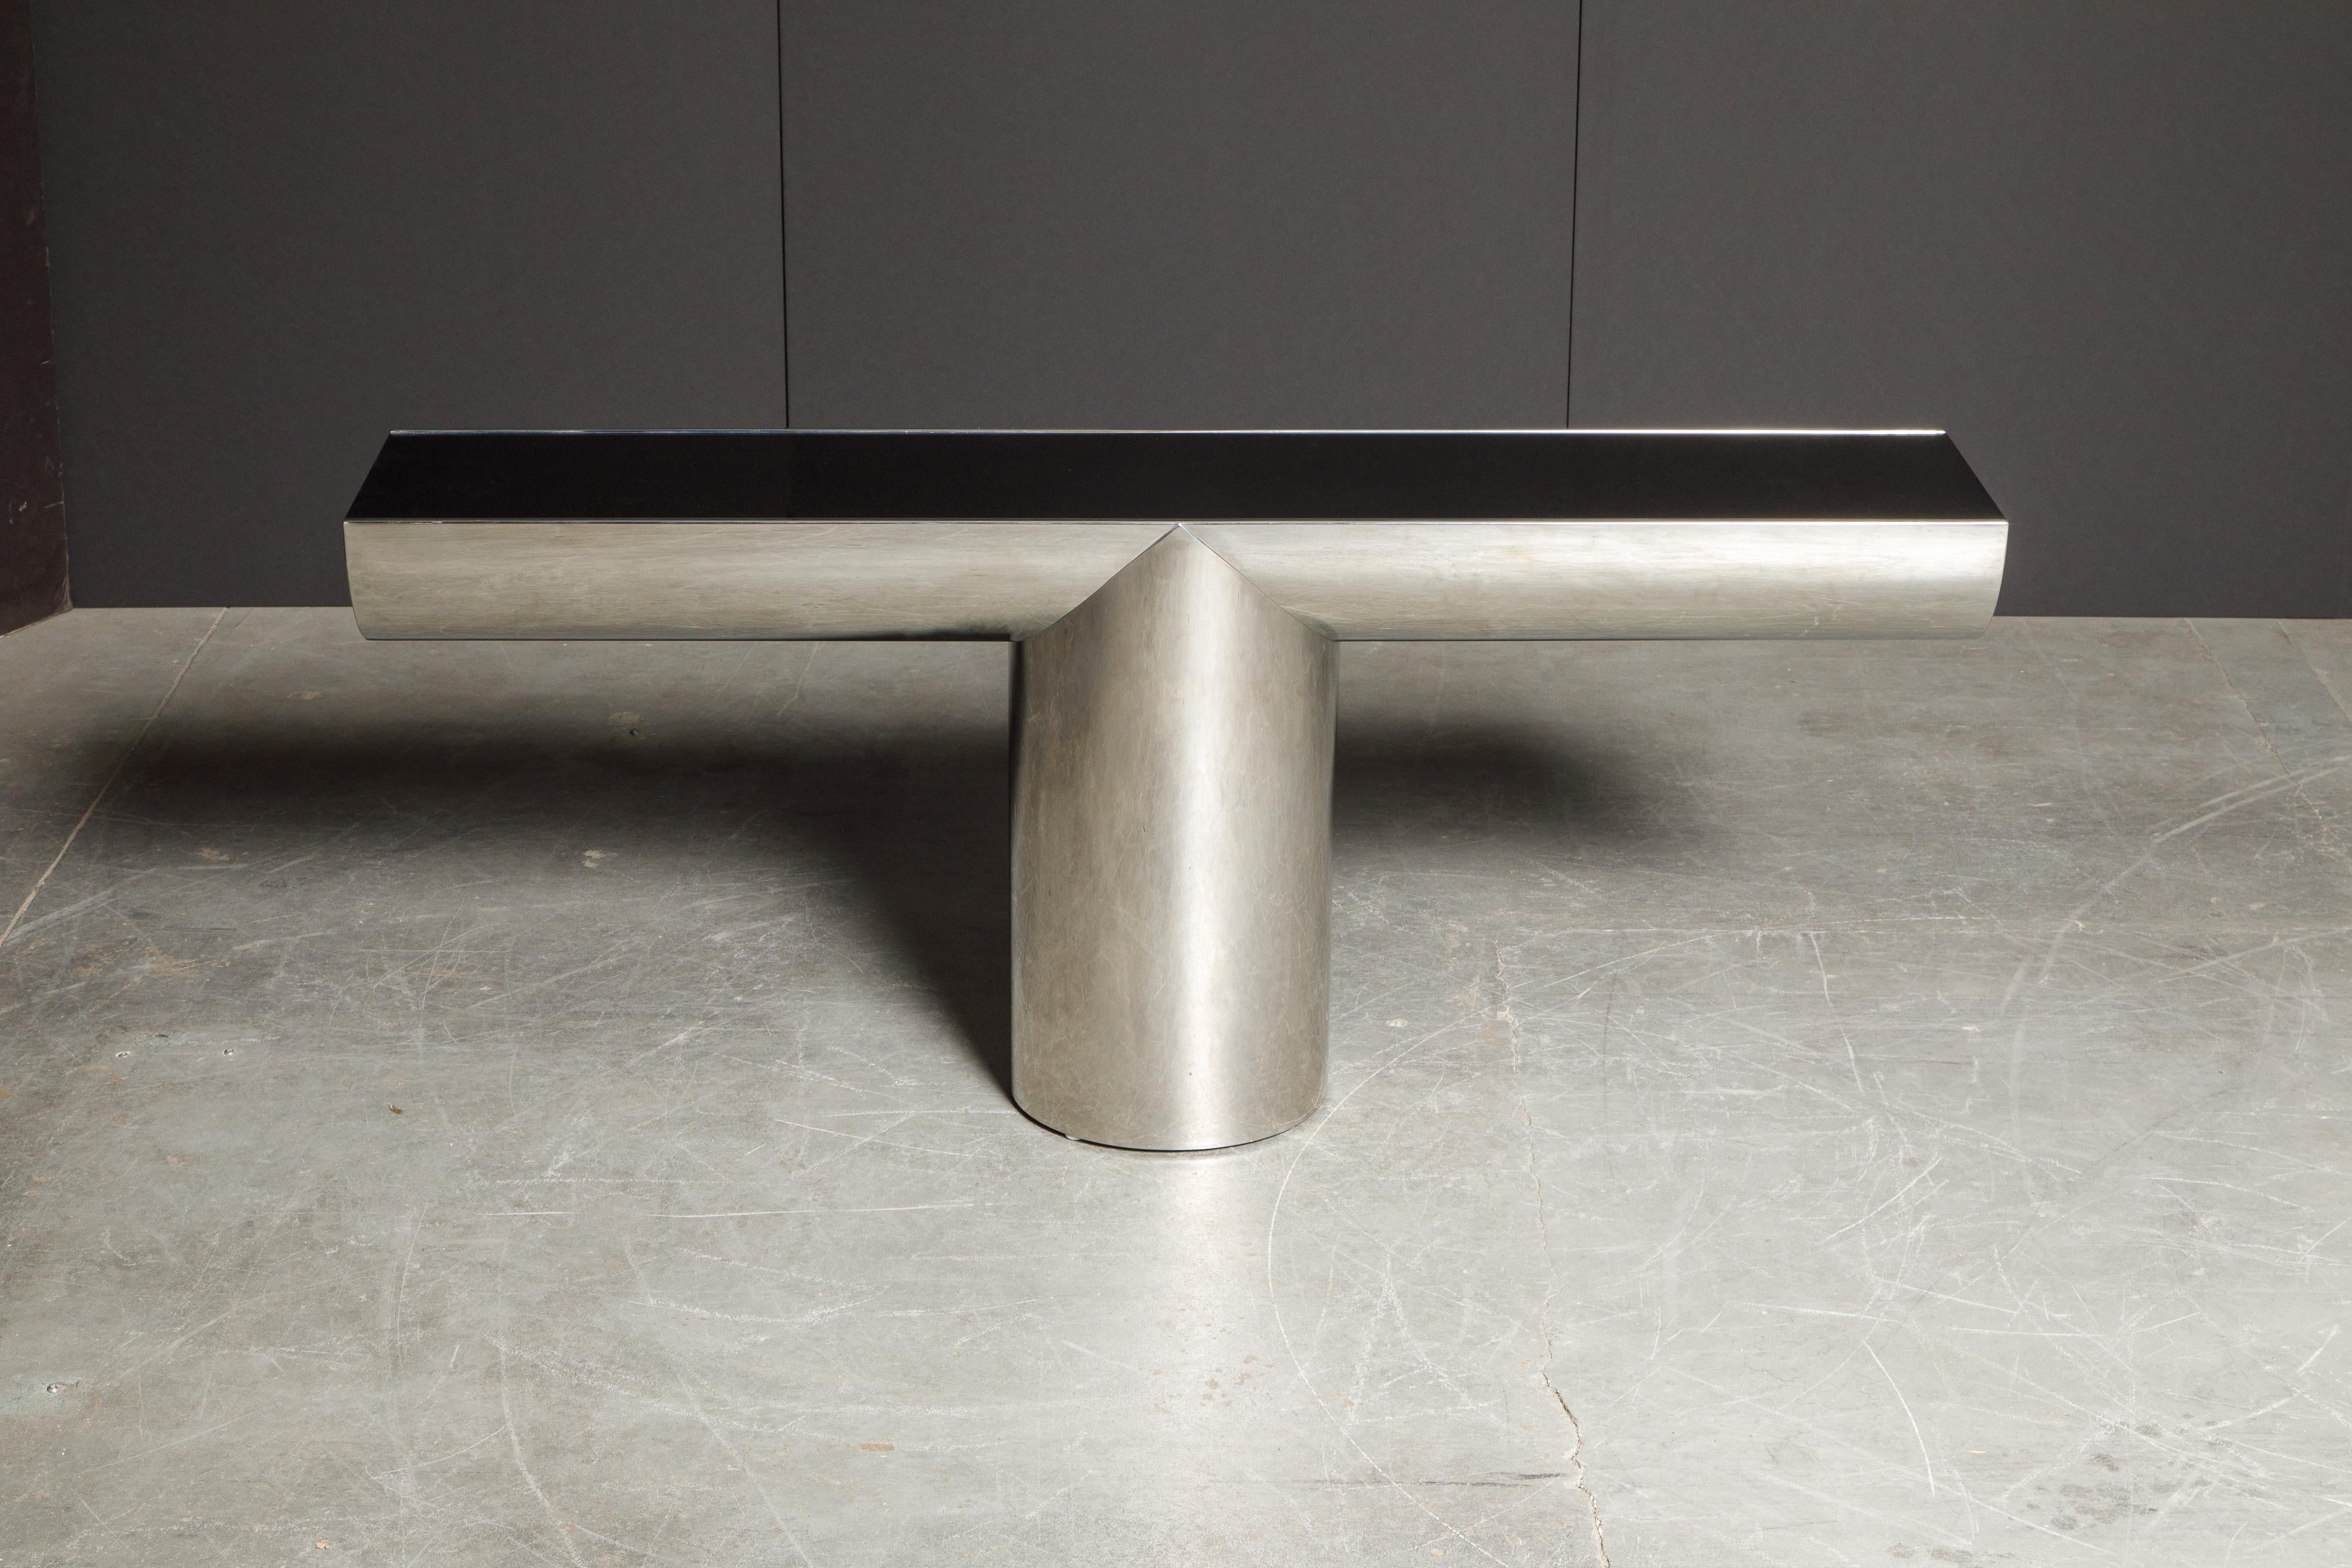 This stylish and classy console table by J. Wade Beam for Brueton features deep black glass and shiny polished stainless steel in the form of a 'T' shape - cantilevering the ends almost like magic. Designed and produced in the 1970's, Brueton's